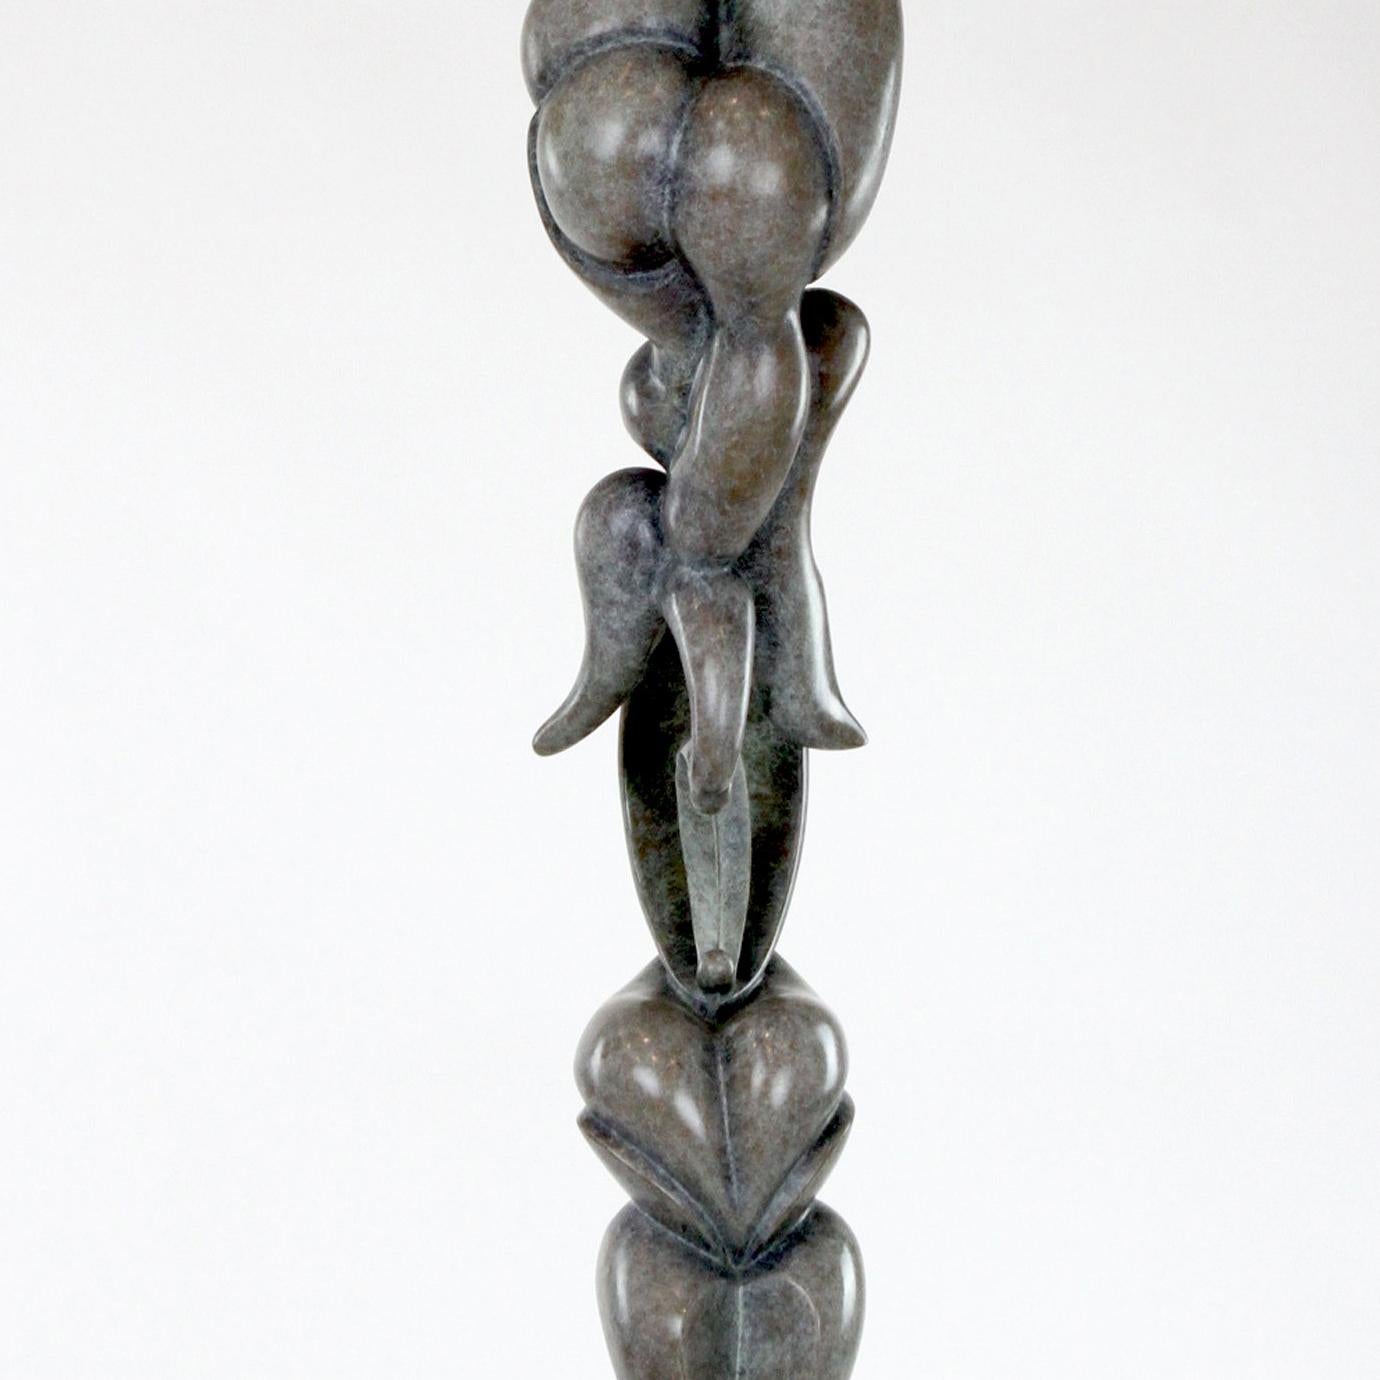 Original bronze sculpture, two nudes woman, acrobatic pose, wrapped with flowers - Contemporary Sculpture by Aima Saint Hunon